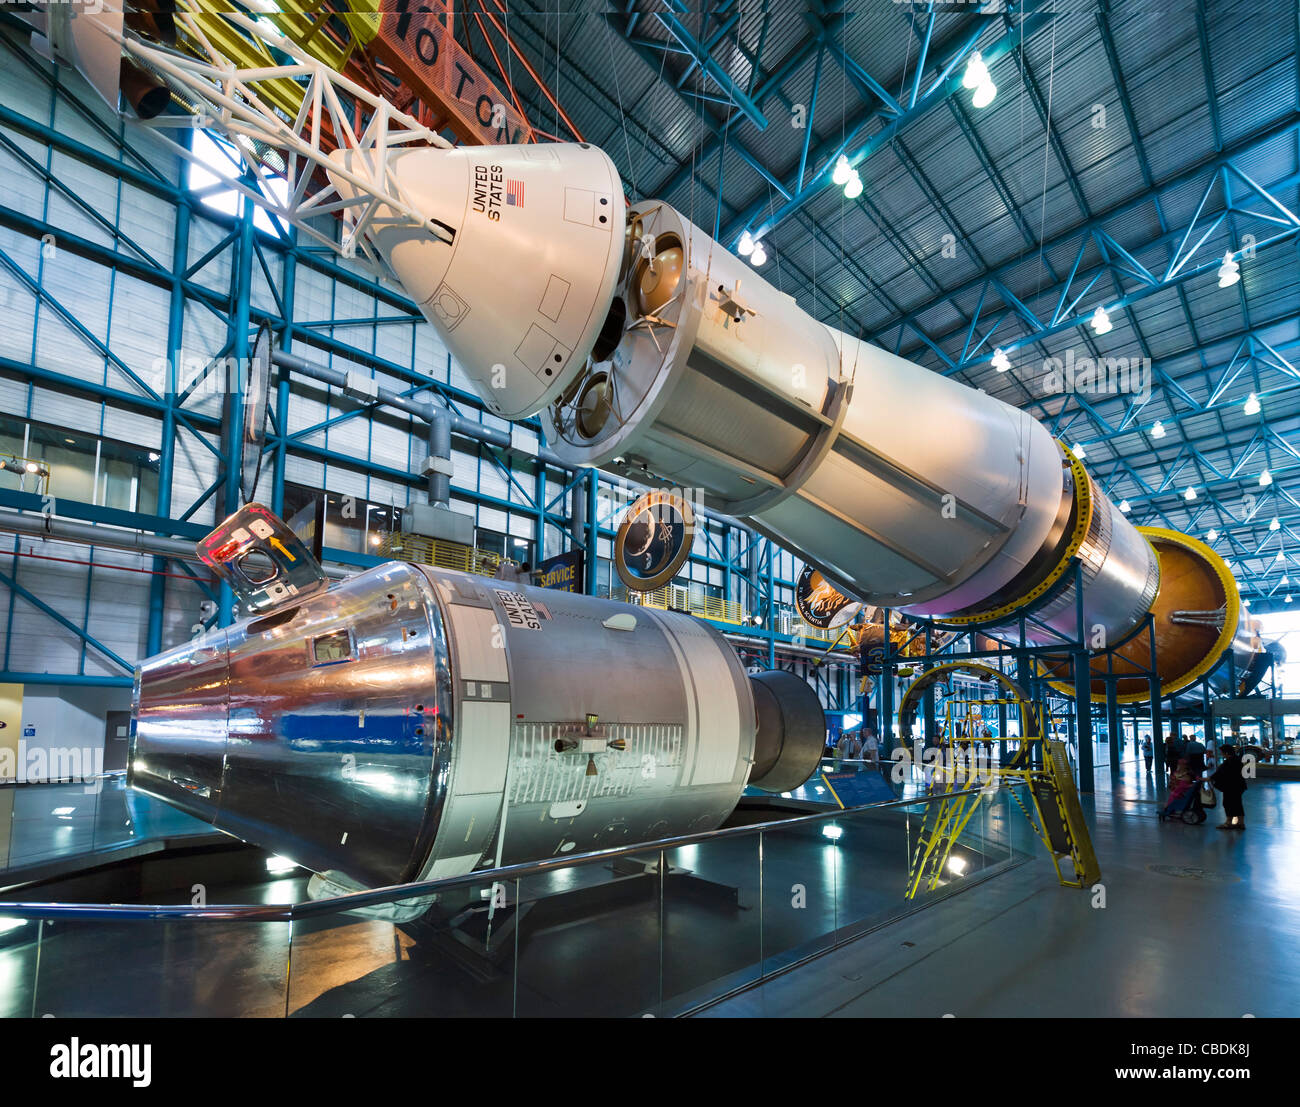 Saturn V rocket from Apollo moon program with the Command Service Module below, Saturn V complex, Kennedy Space Center, Florida Stock Photo